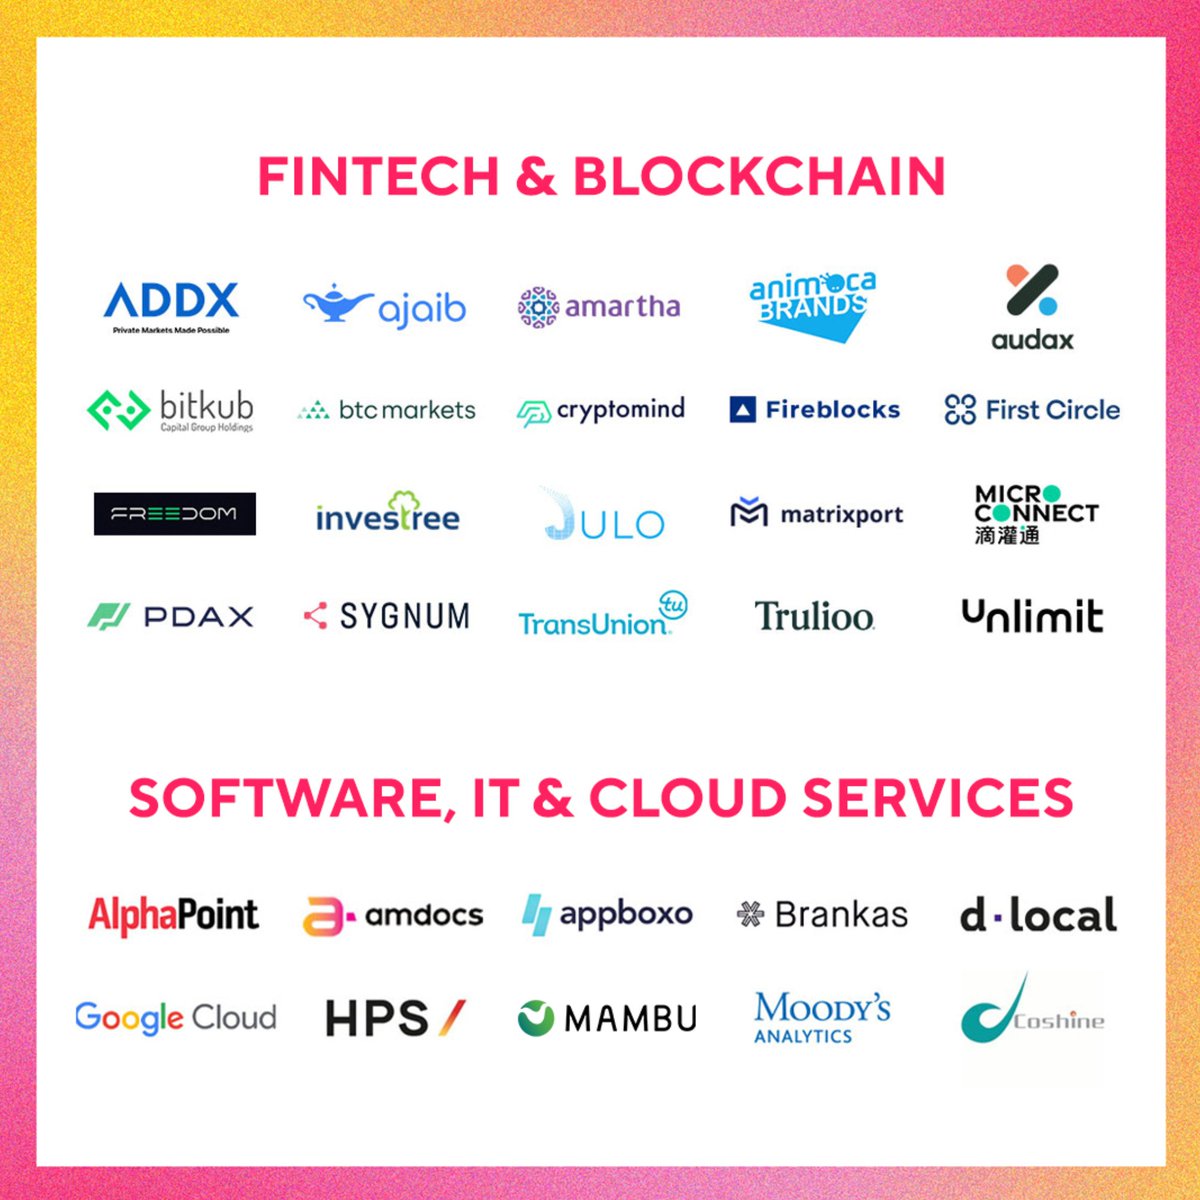 Don't miss your opportunity to network with 3,000+ fintech leaders from Asia and beyond at #Money2020Asia. Swipe now to see some of the attending companies you can connect with! Get USD300 off when you use our exclusive code FINPOW300 at hubs.li/Q02rPgbF0.